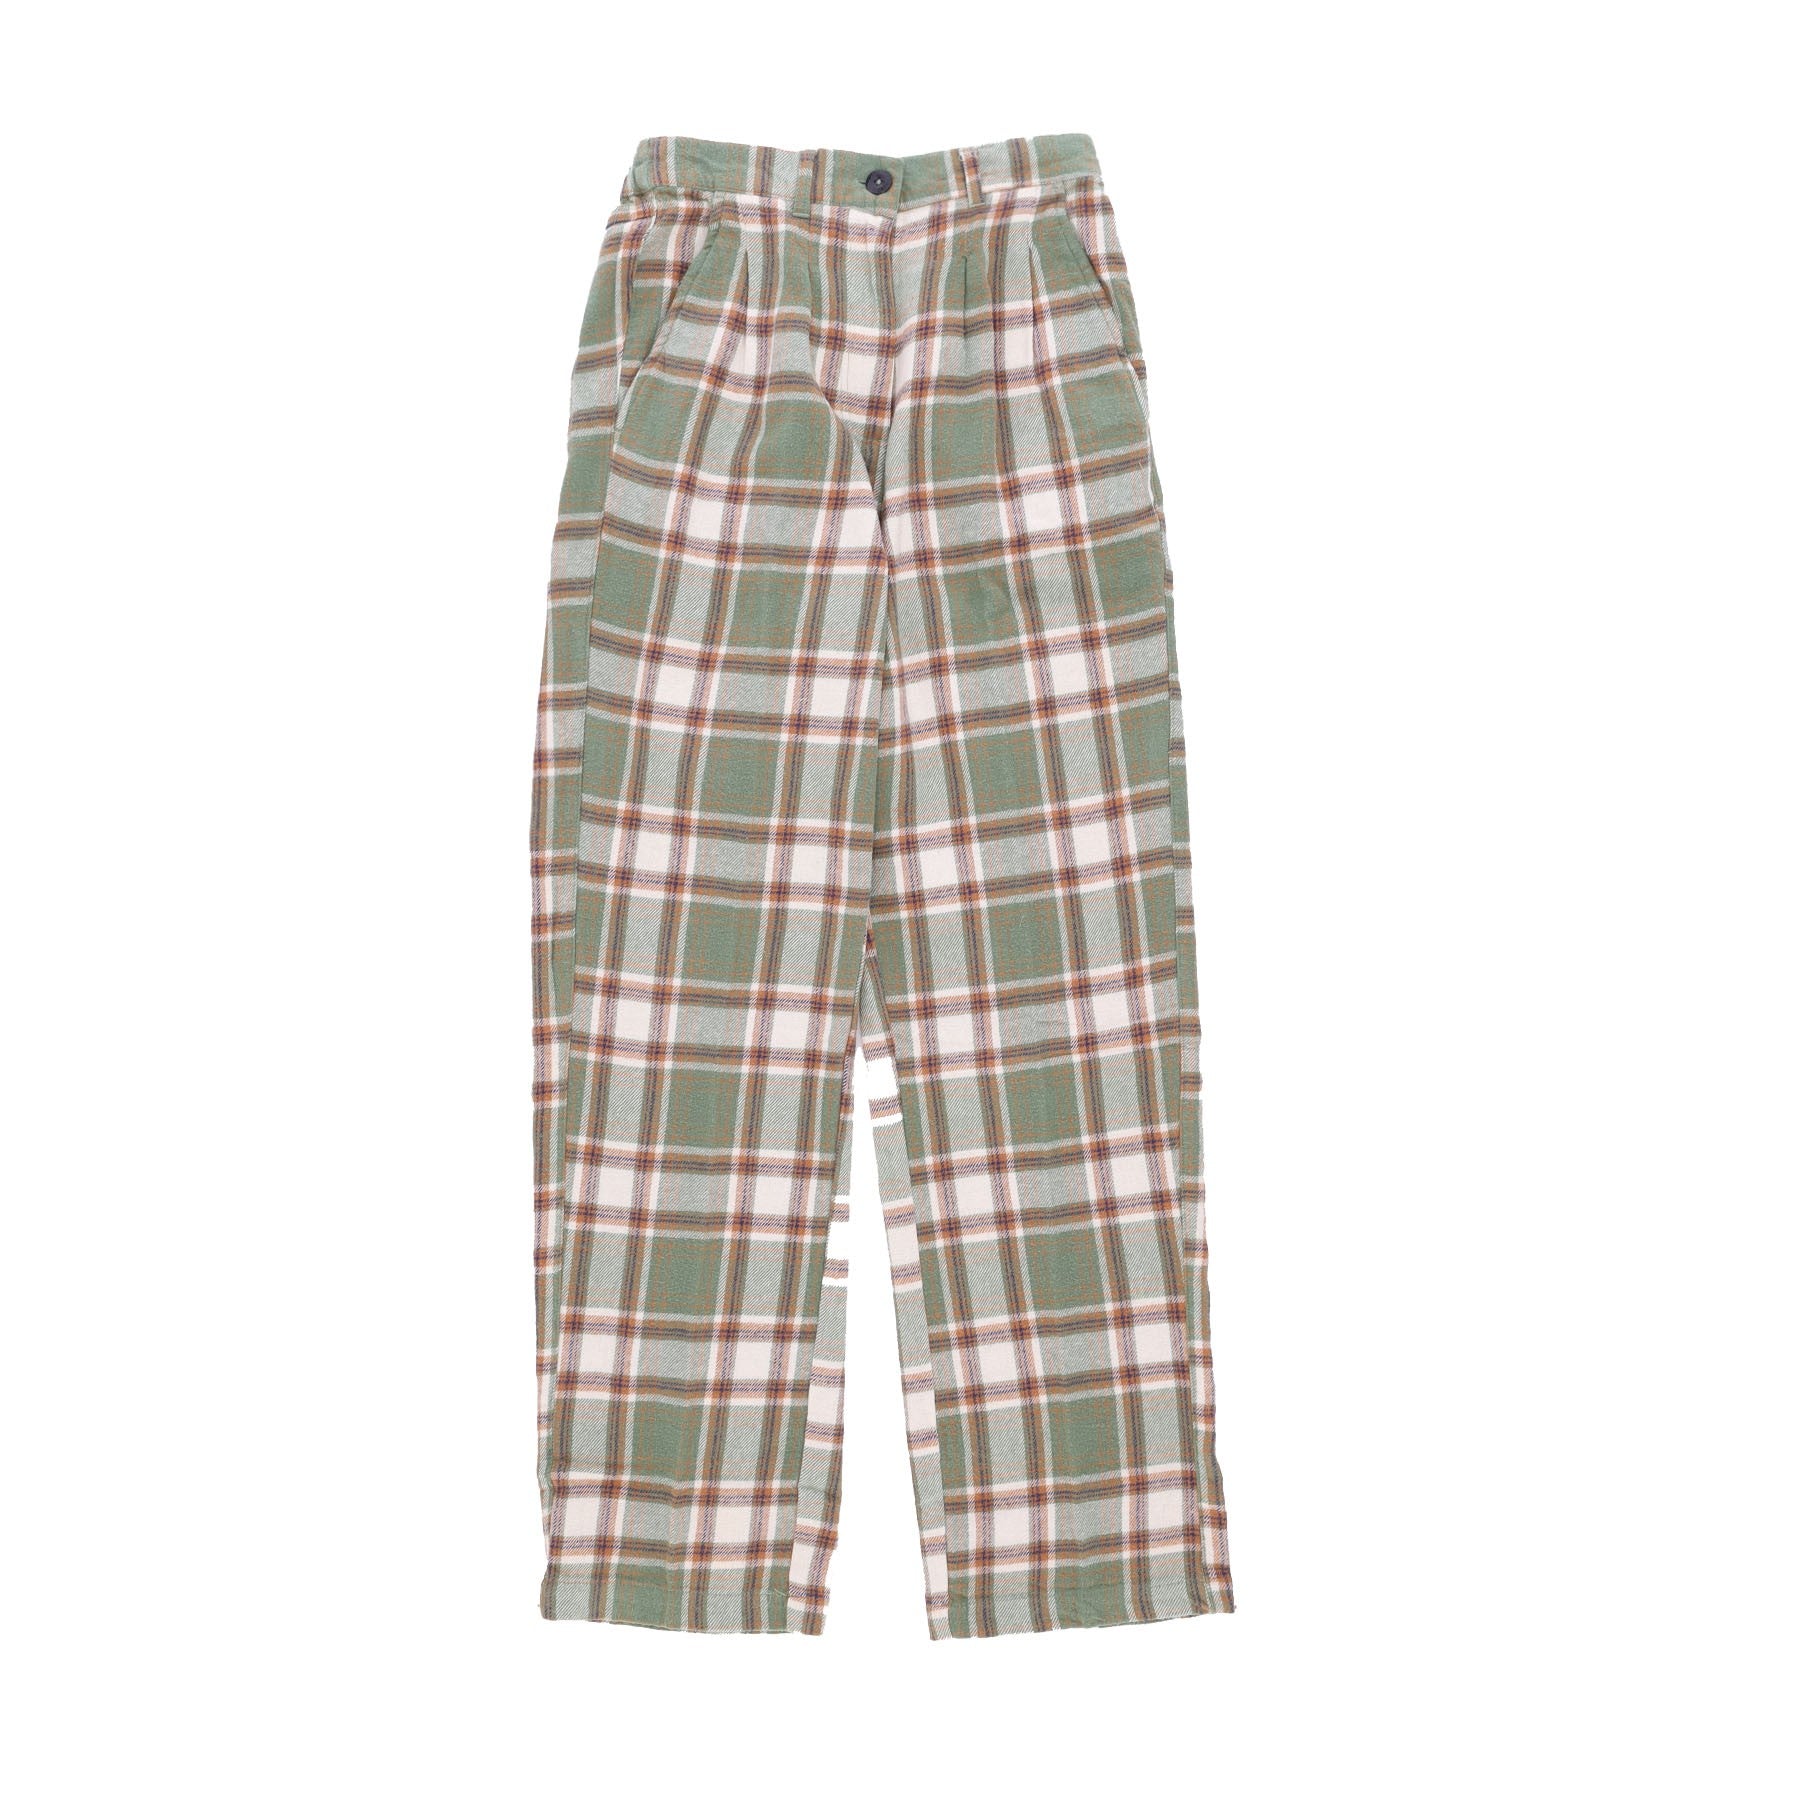 Obey, Pantalone Lungo Donna Pia Flannel Pant, Loden Frost Multi